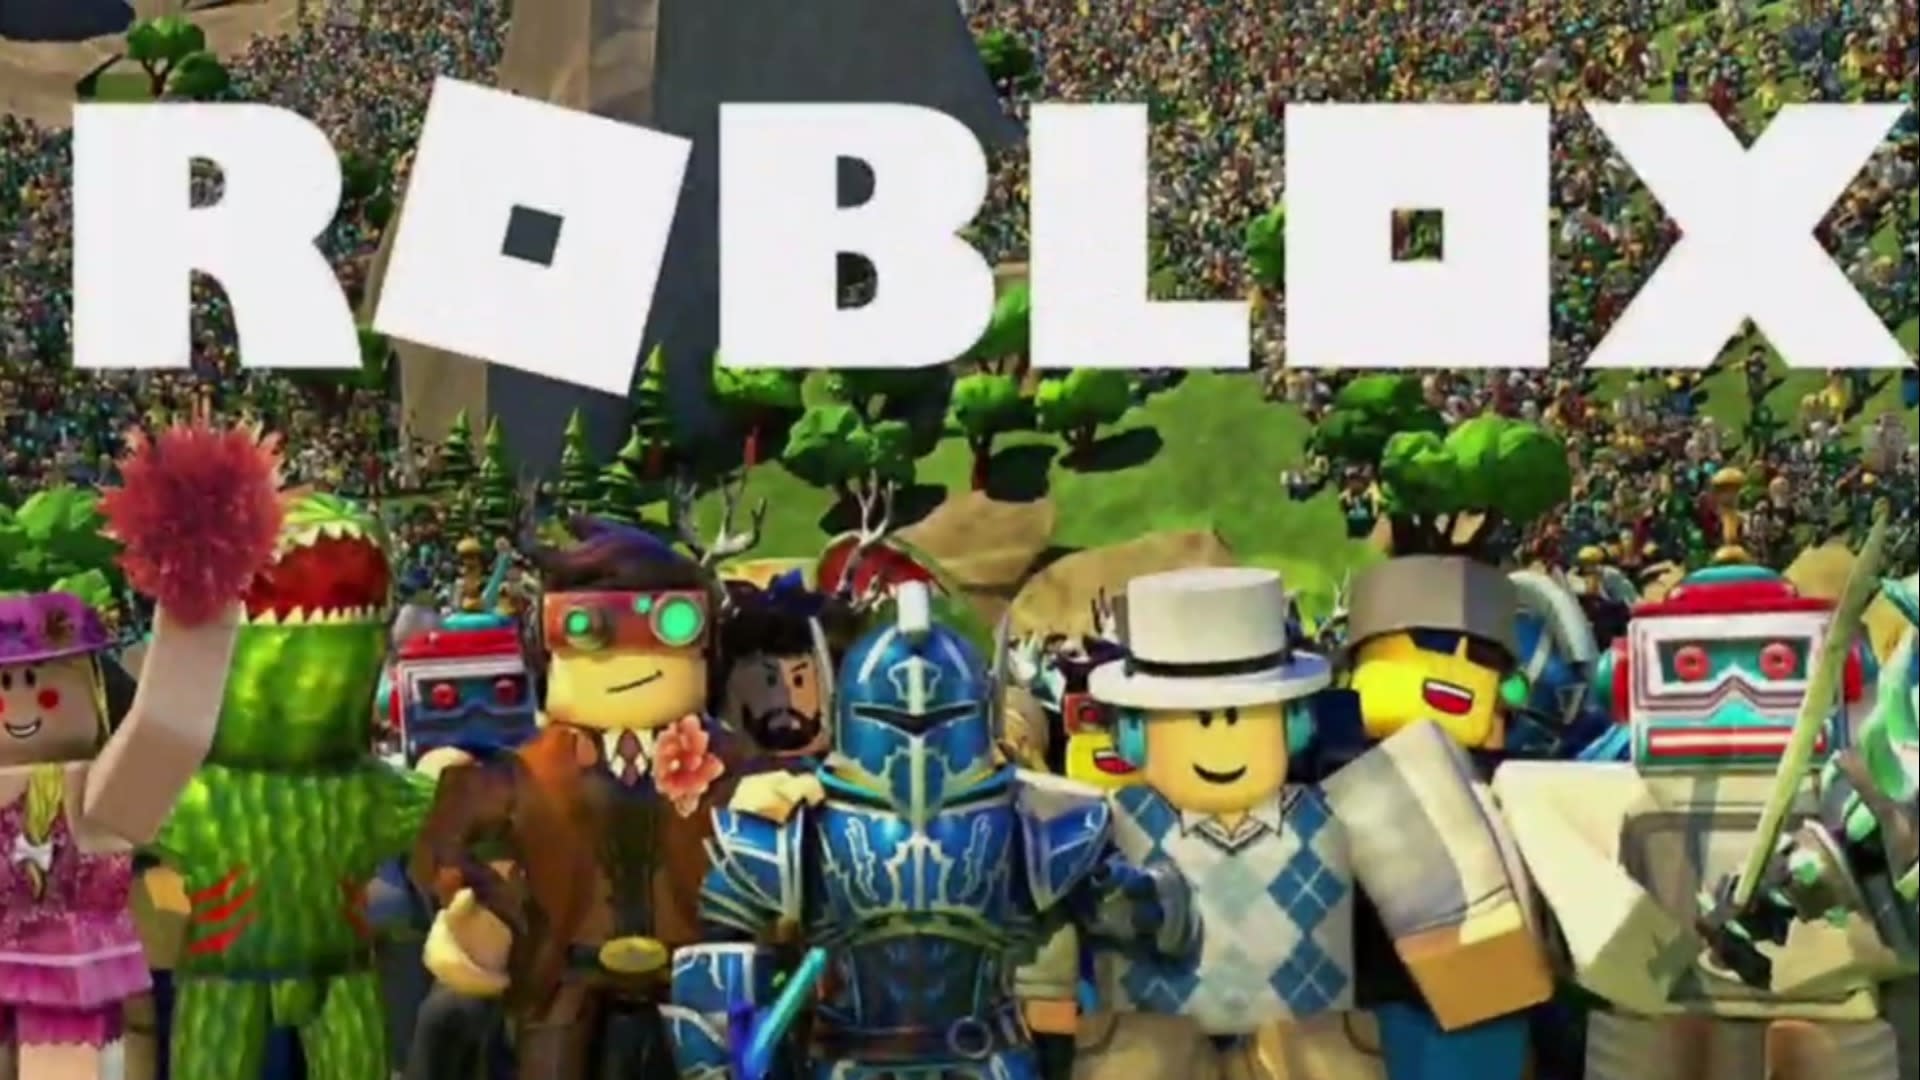 New Questions About Some Inappropriate Content On The Gaming Platform Roblox Video - roblox toys series 2 yahoo search results yahoo image